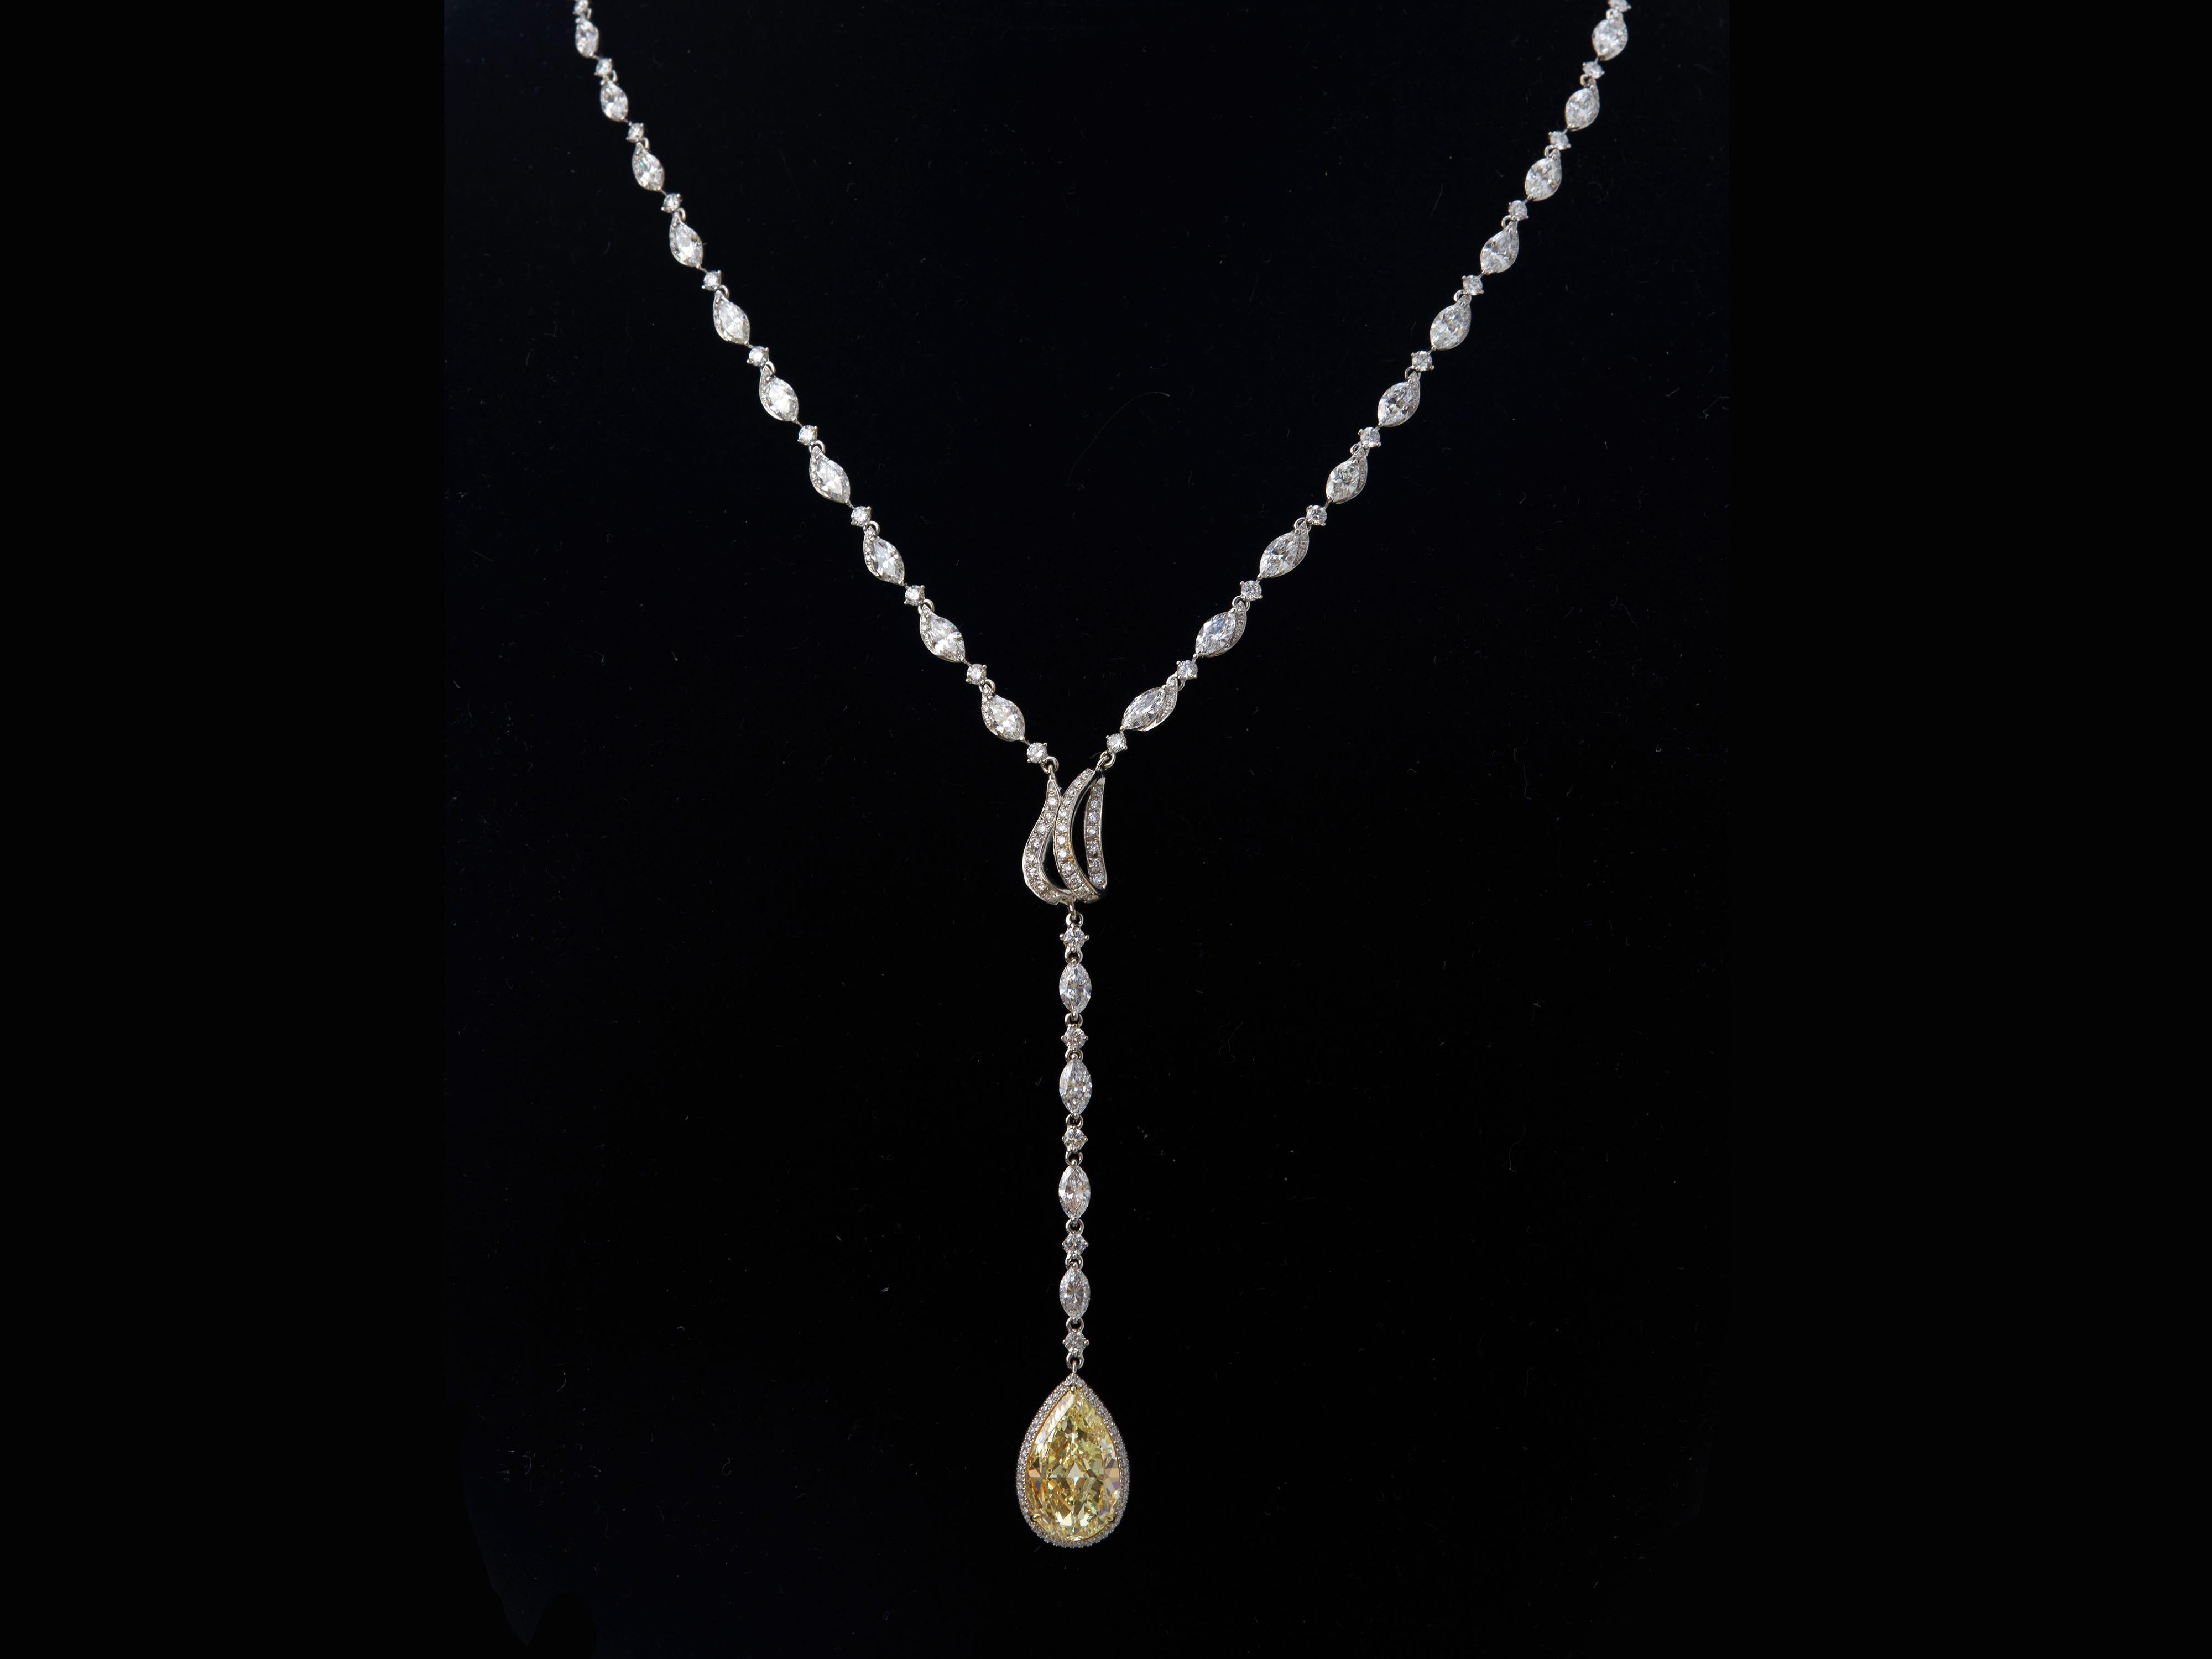 This luxurious design diamond drop necklace is simple but elegant. features Just under 4 carat Fancy Light Yellow Pear shape GIA certified, internally flawless and Excellent polish and symmetry diamond pendant, suspended with white diamonds. The